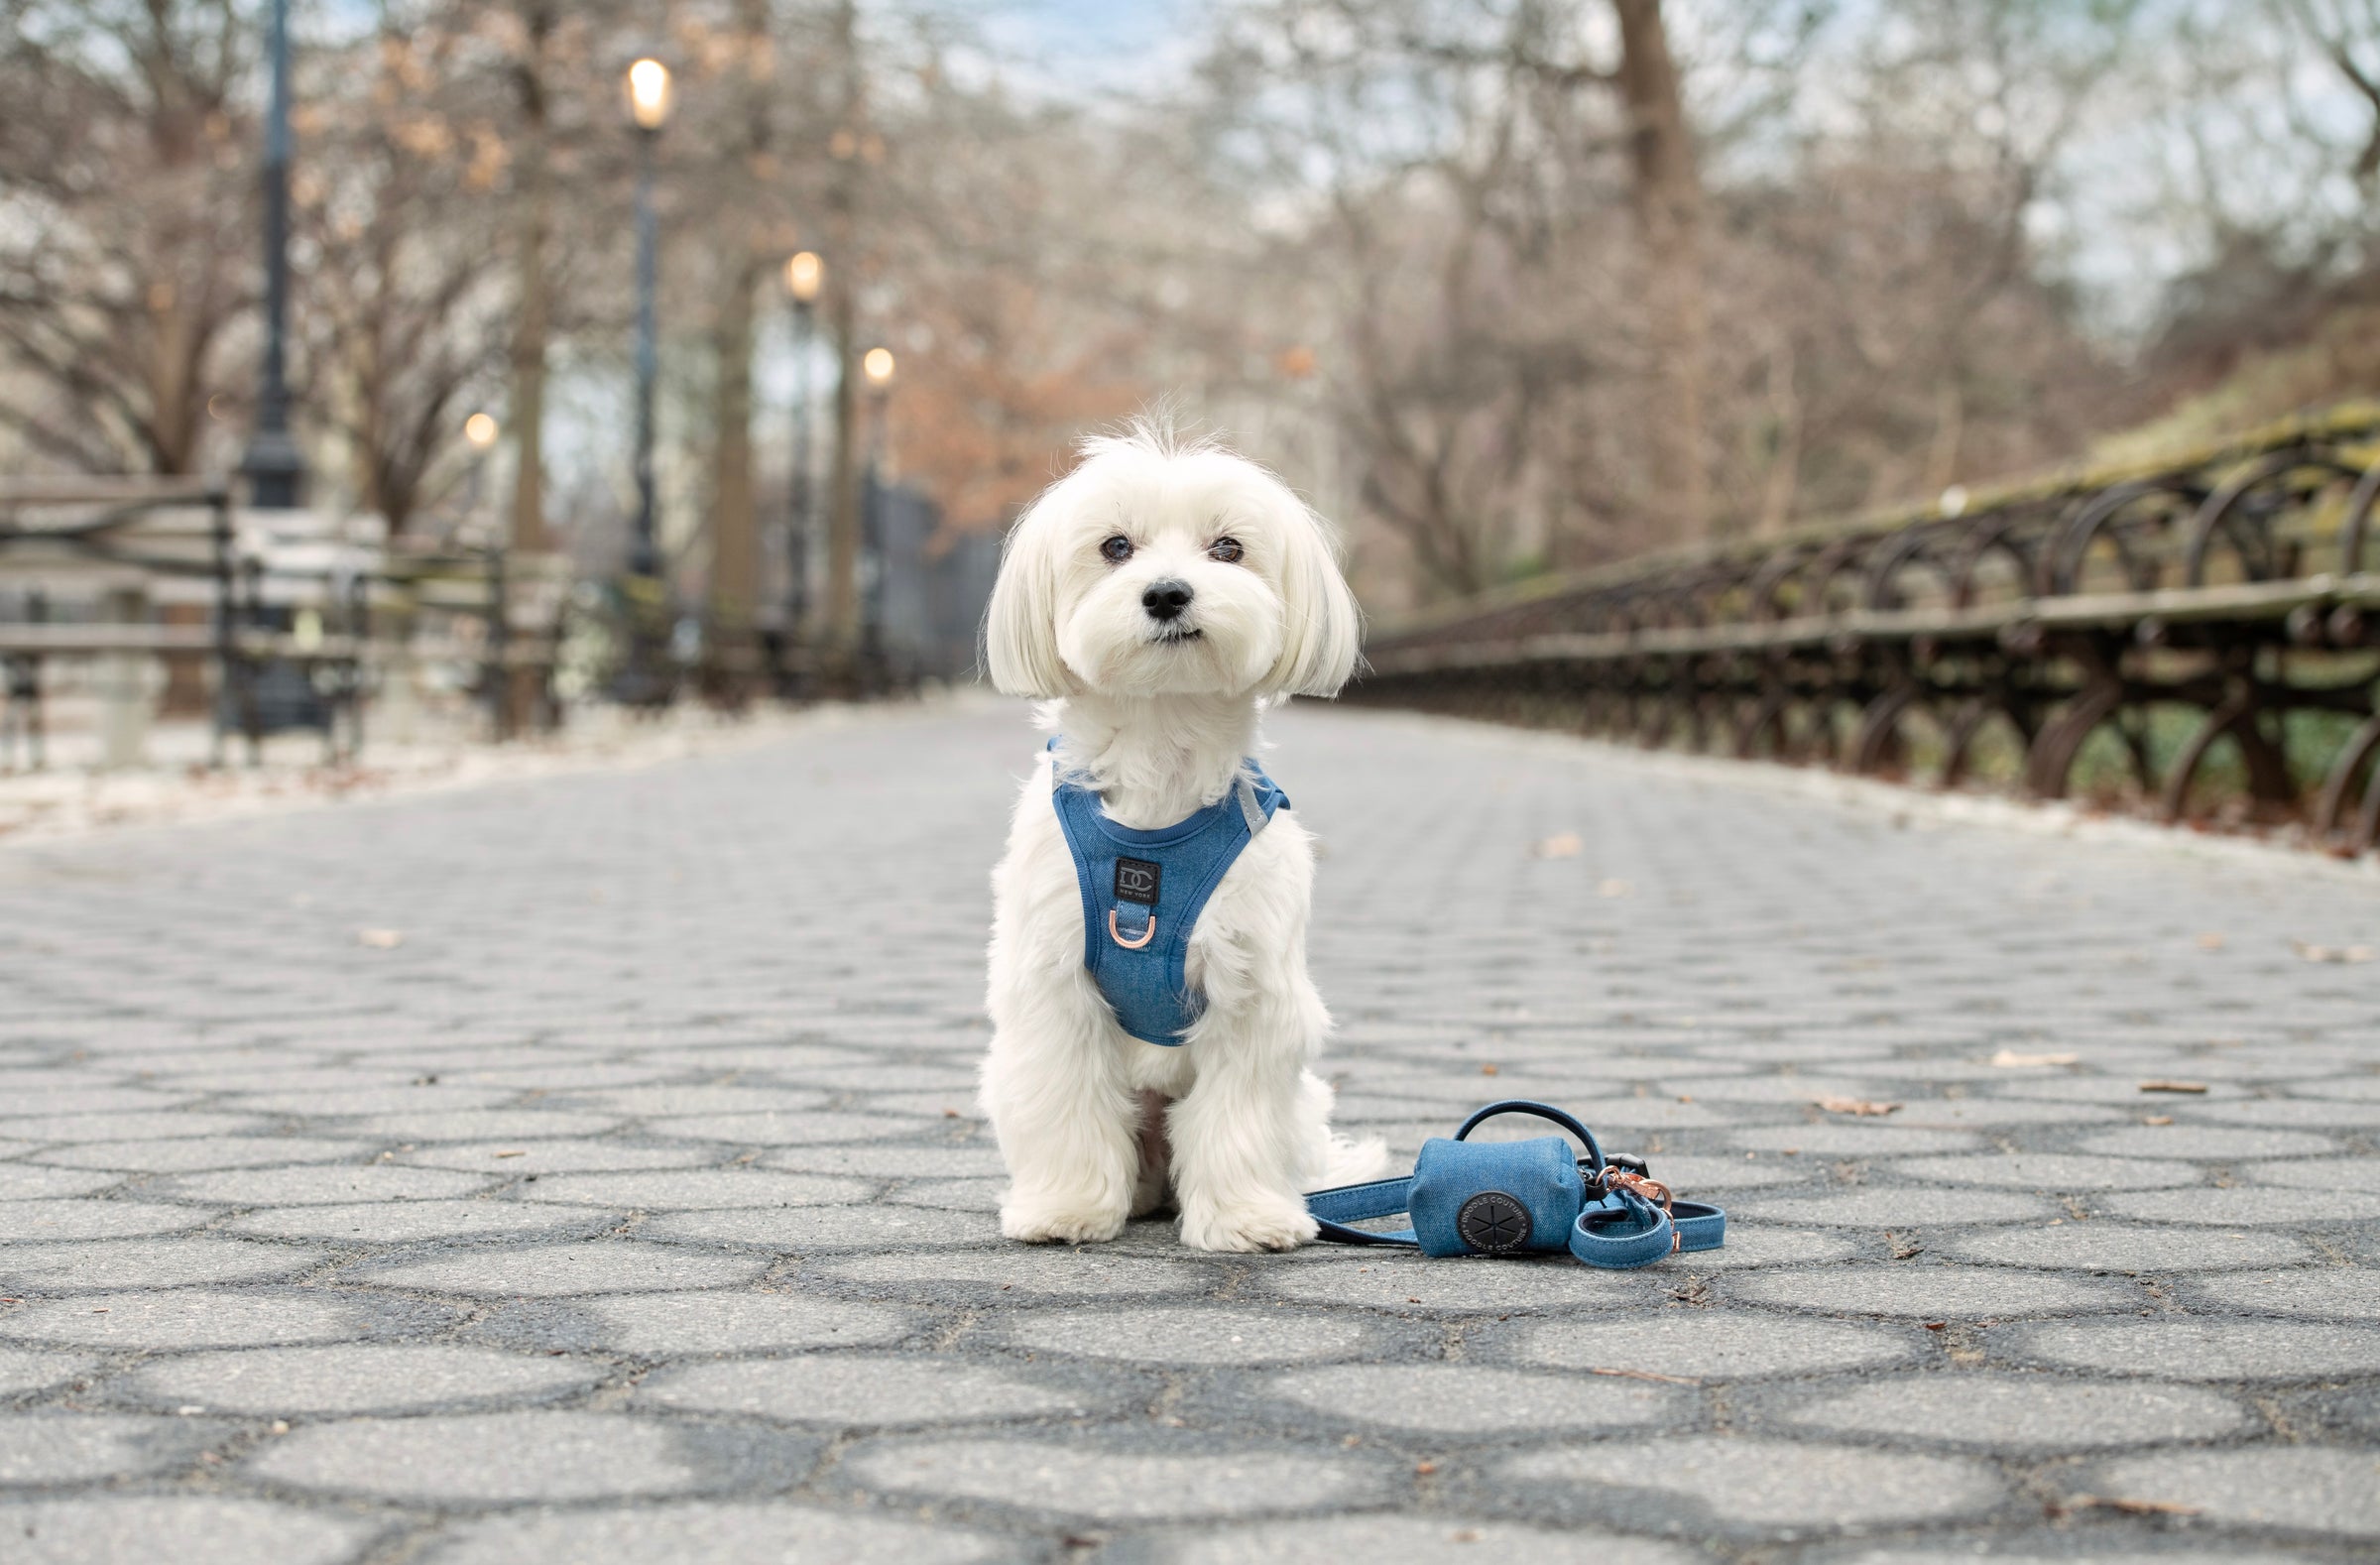 White puppy wearing a complete walking set, Step-In No-Pull Harness, adjustable Stay-In-Place Leash, and stylish Poop Waste Bag Dispenser and Holder